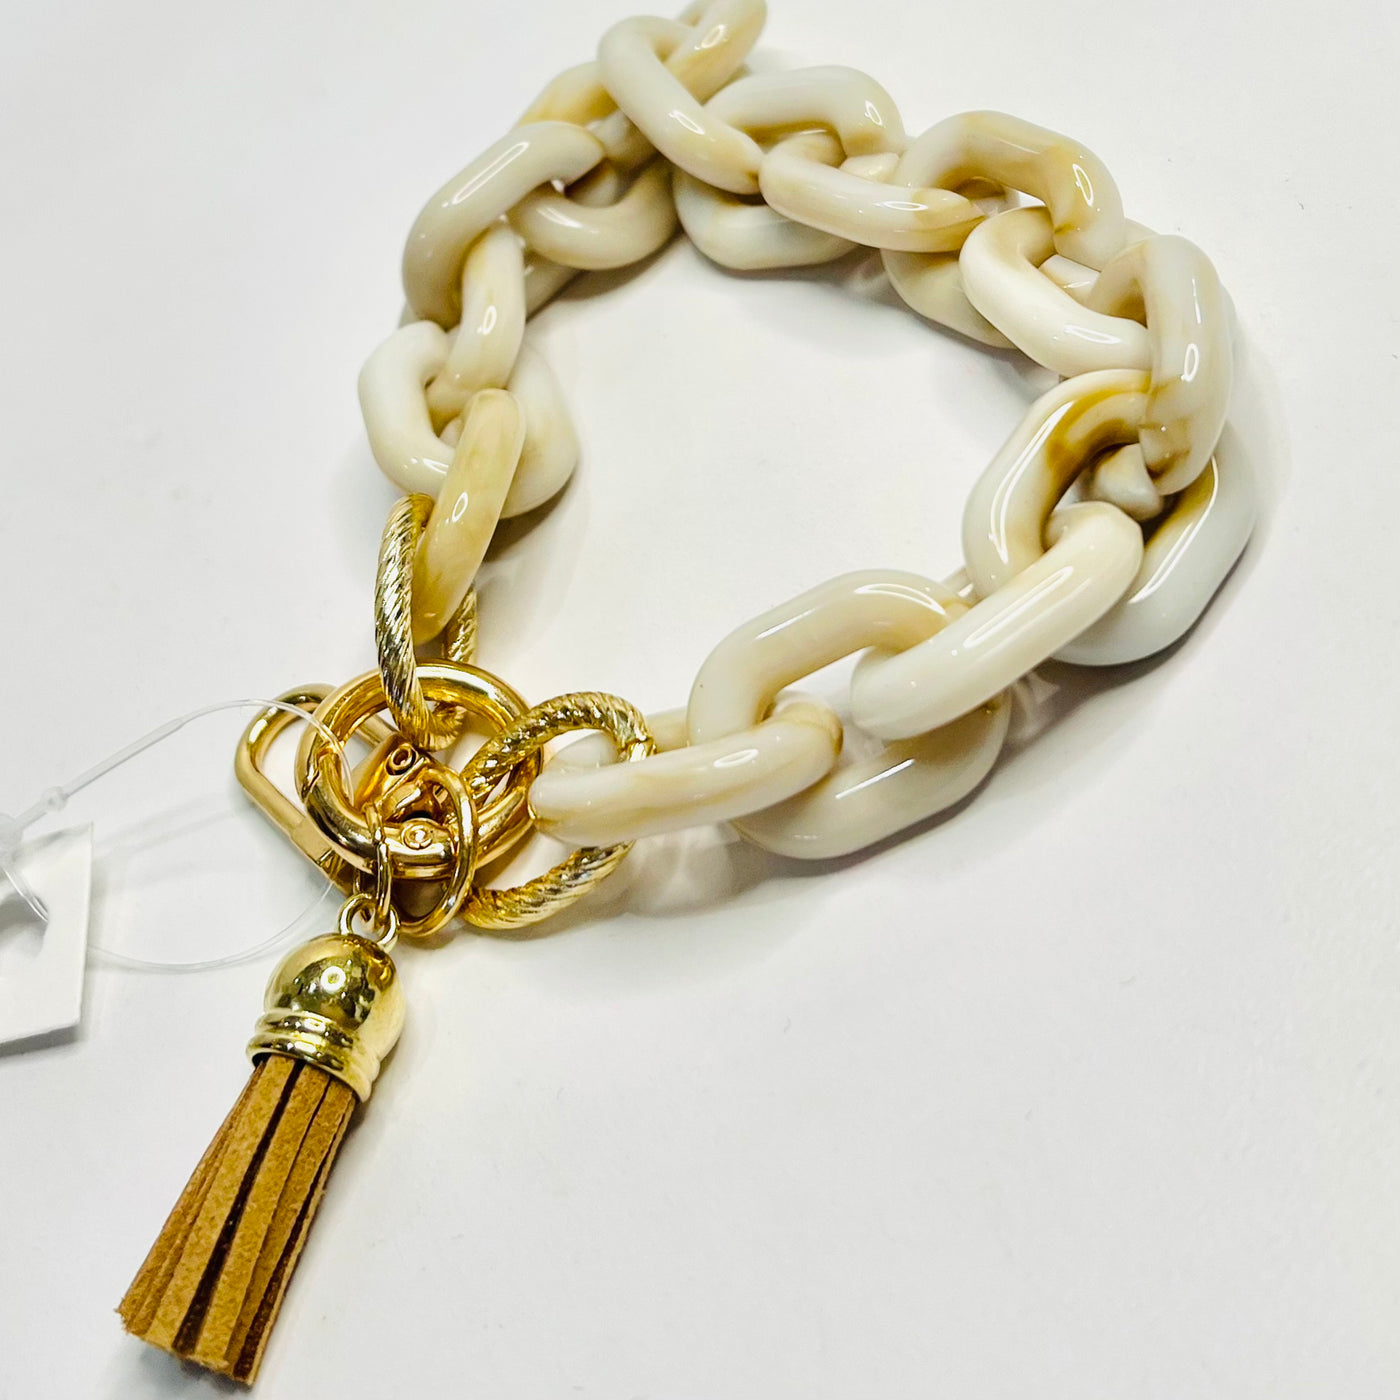 Chain Link Key Ring